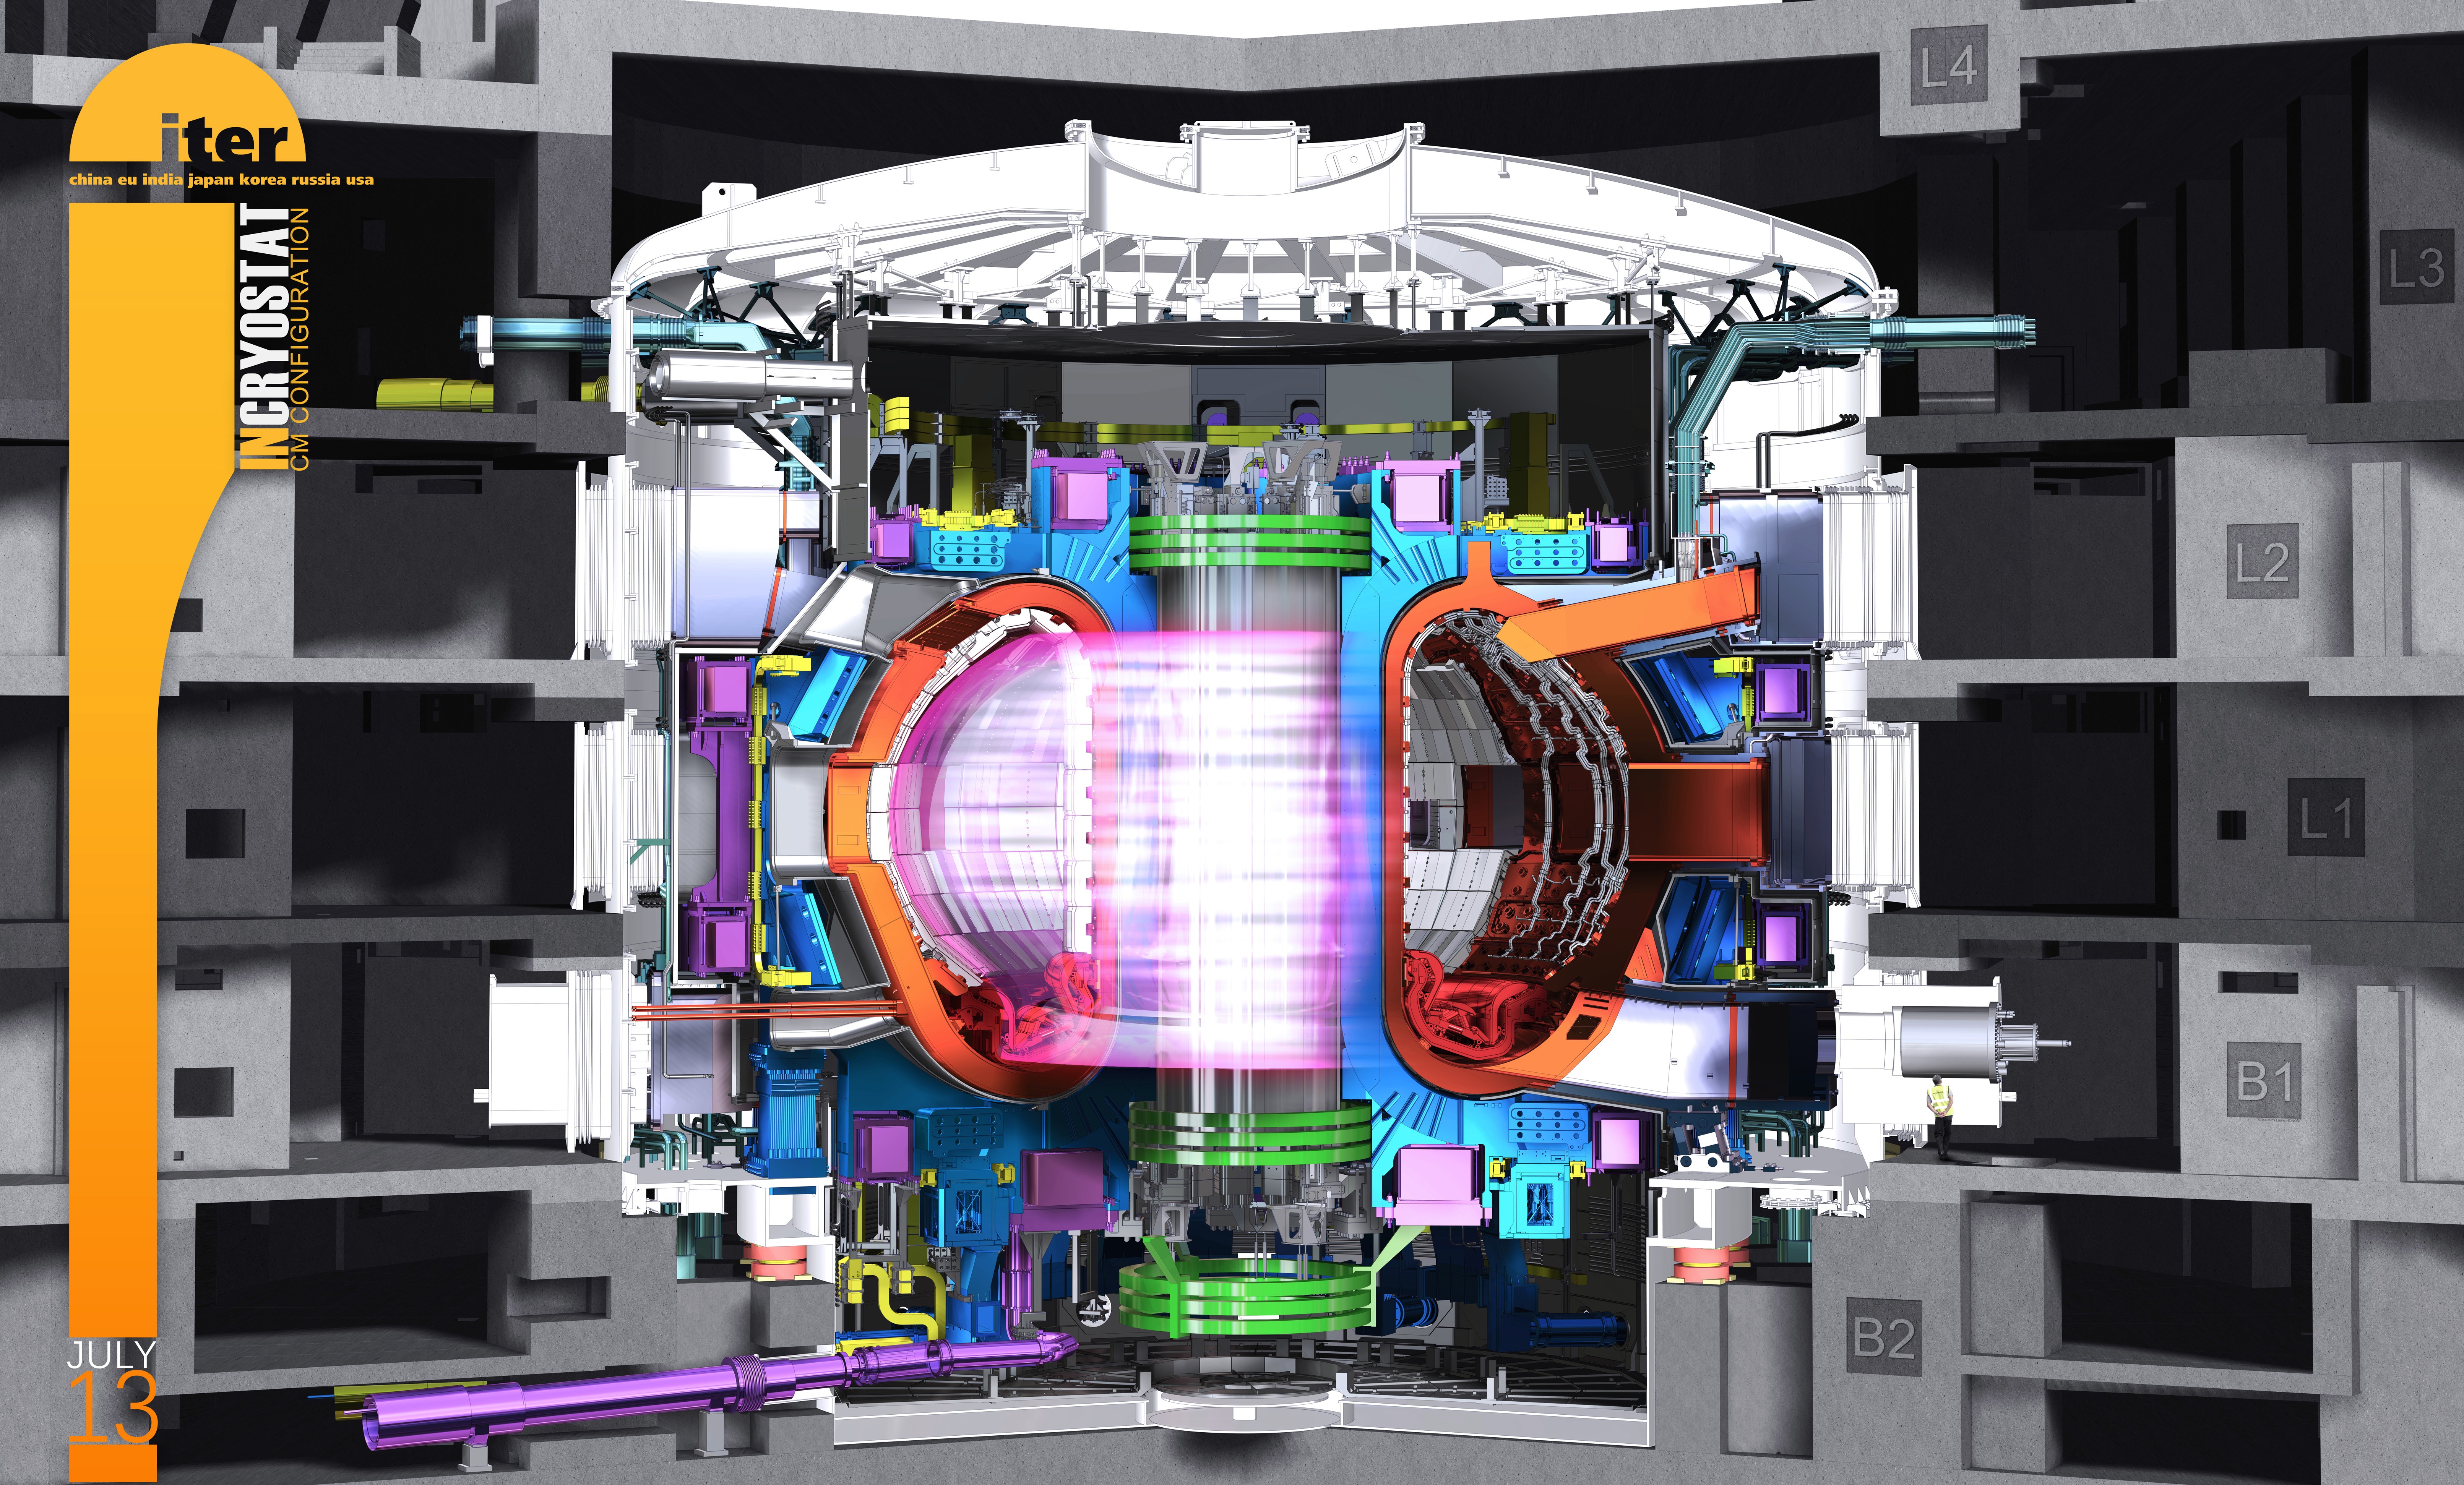 Europe Closer to Fulfilling its Dream on Fusion Energy